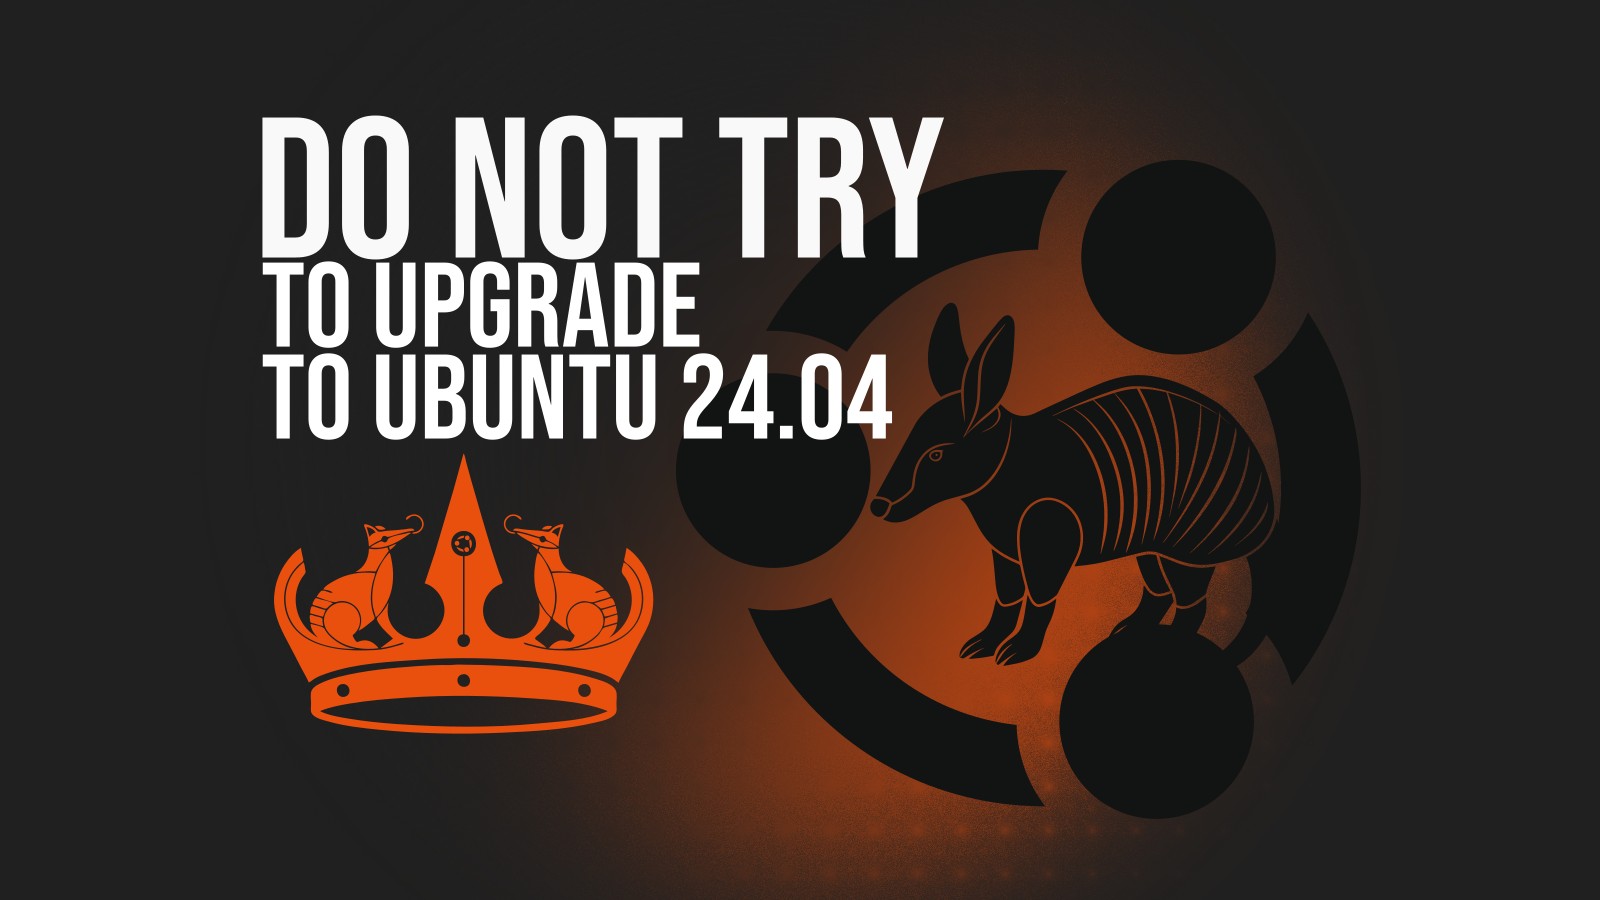 Ubuntu 24.04 LTS (Noble Numbat) was released just a few days ago. So you might want to jump to it from 22.04 LTS or 23.10 (Mantic Minotaur)—the exci